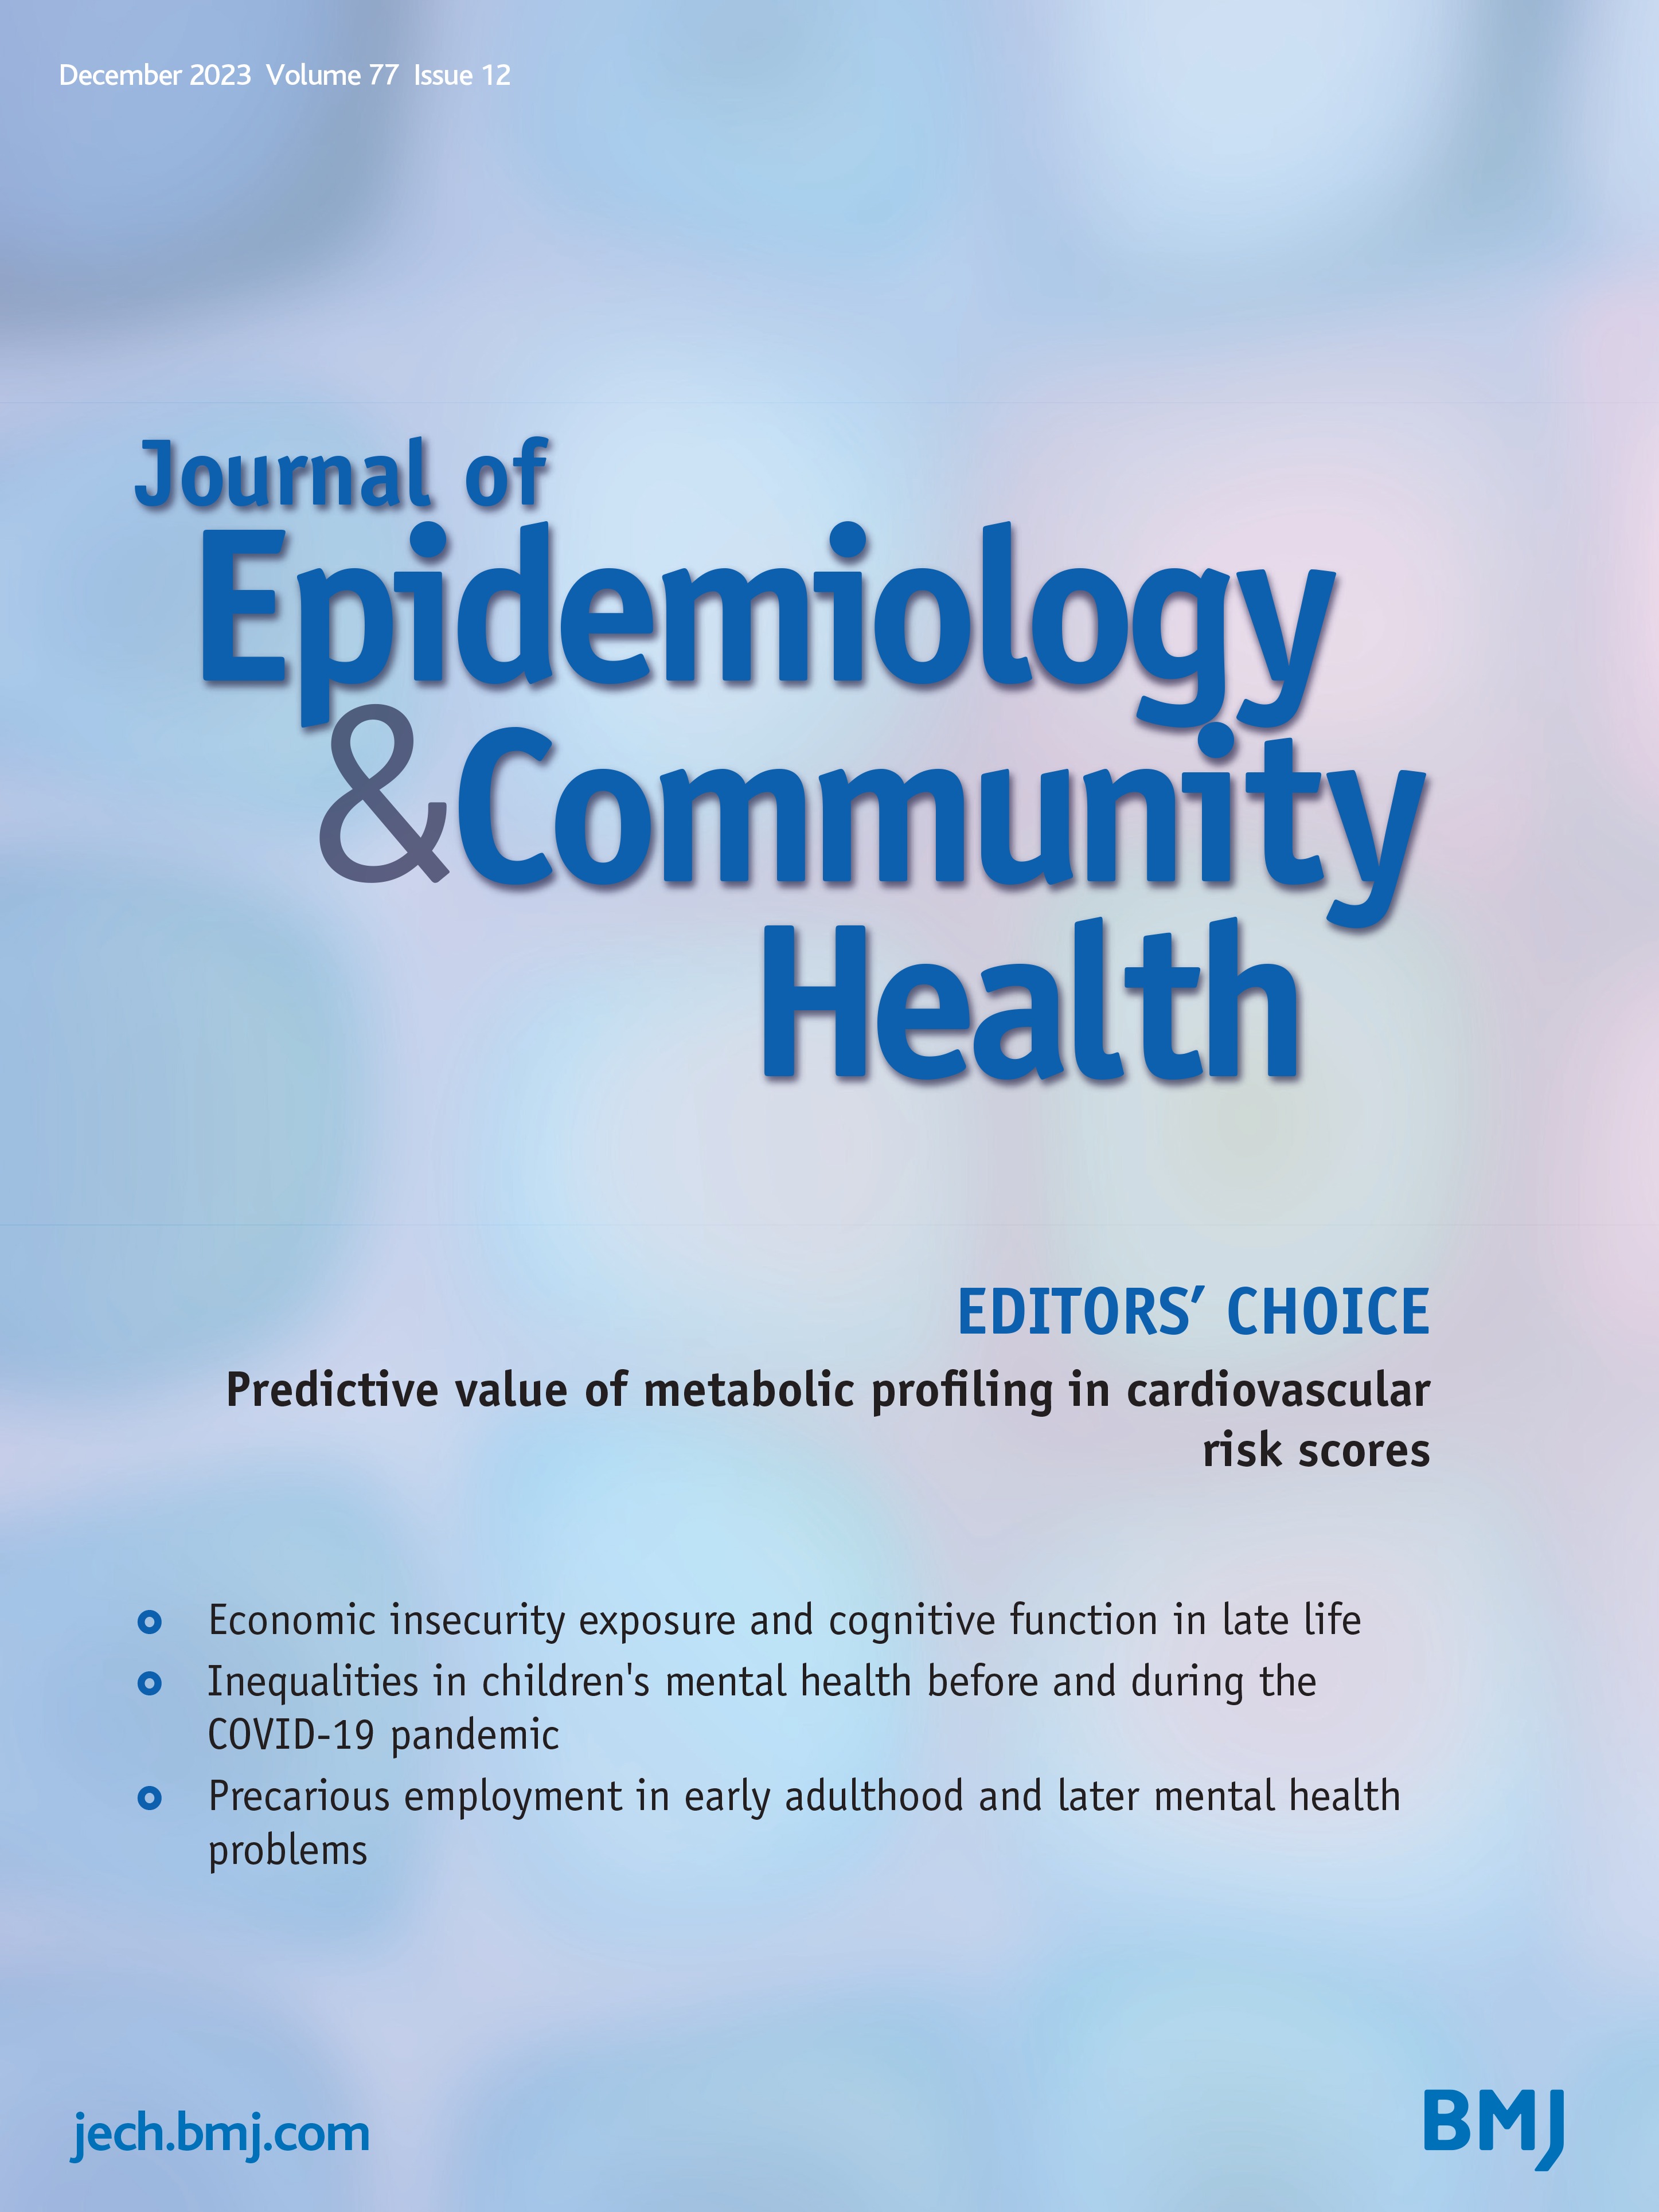 Sex differences in adverse events following seasonal influenza vaccines: a meta-analysis of randomised controlled trials